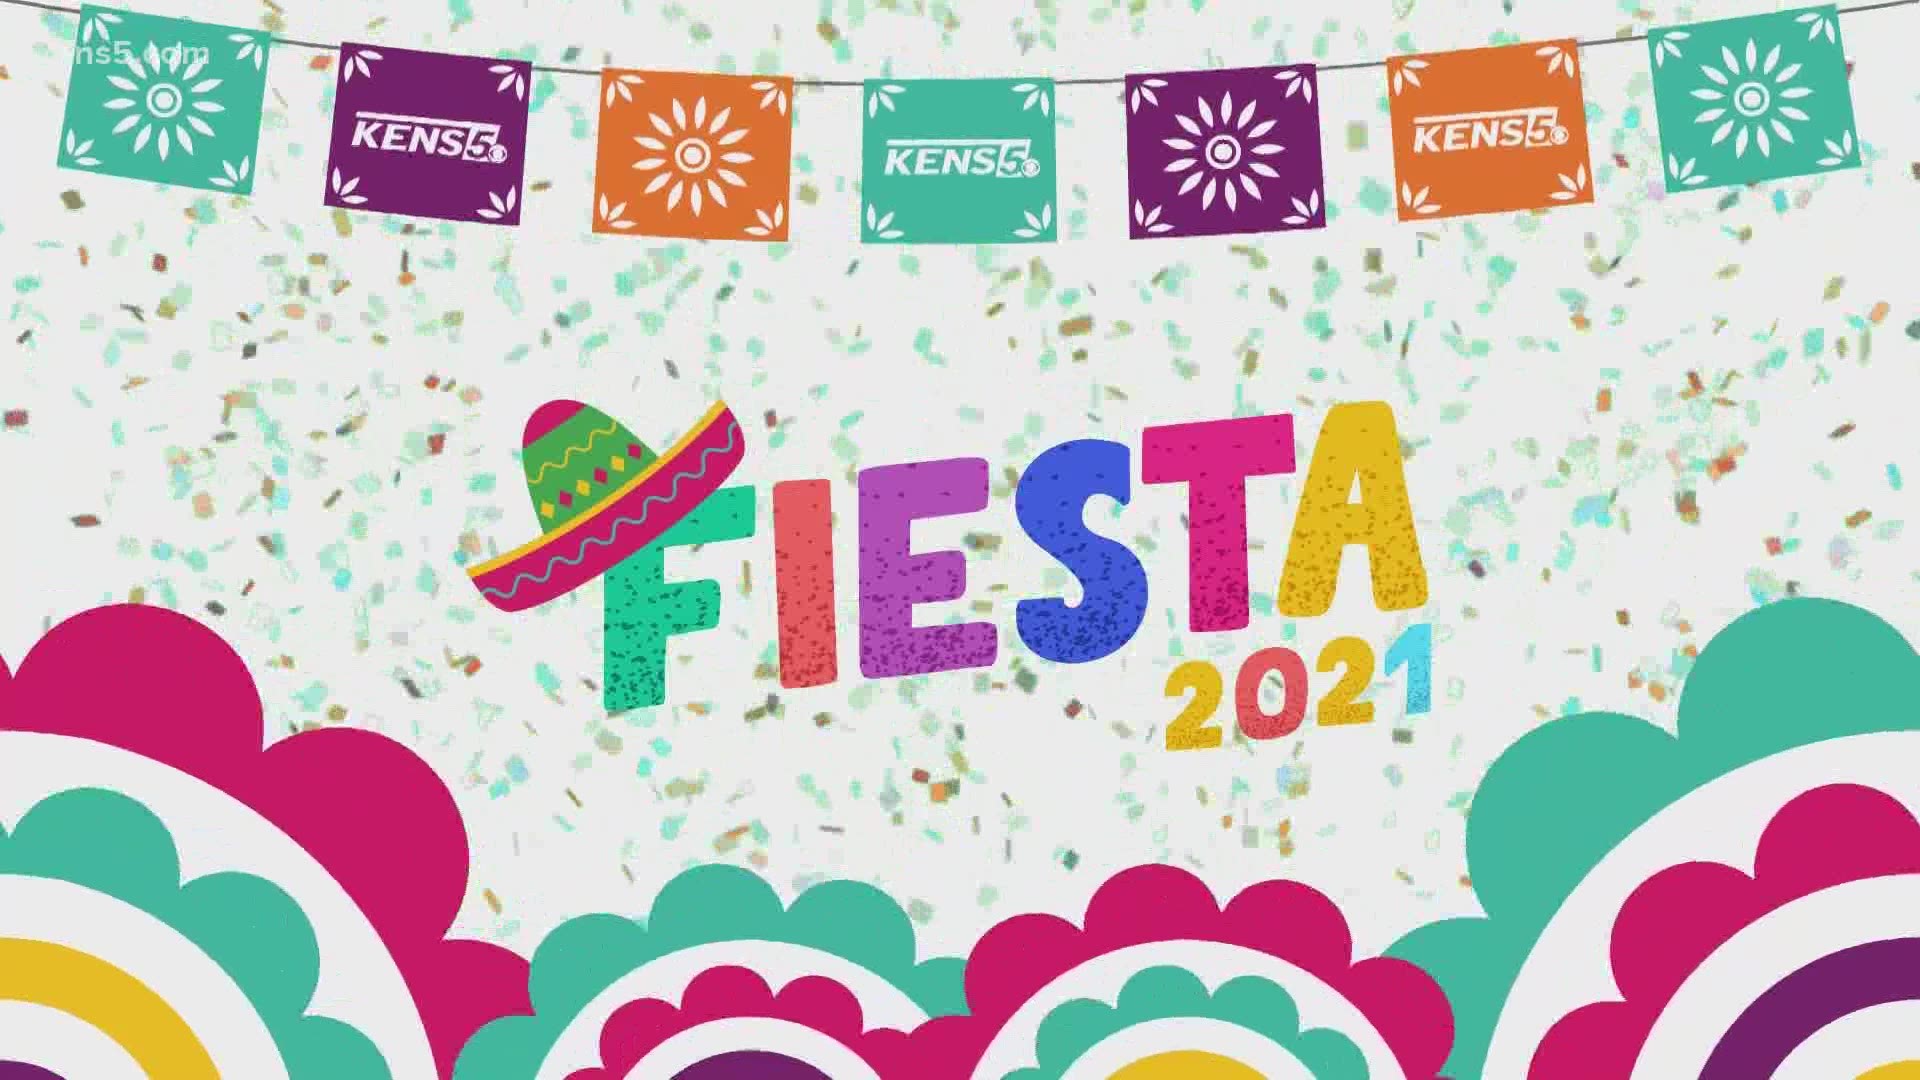 If you're headed out to any Fiesta events, make sure to drink plenty of water.